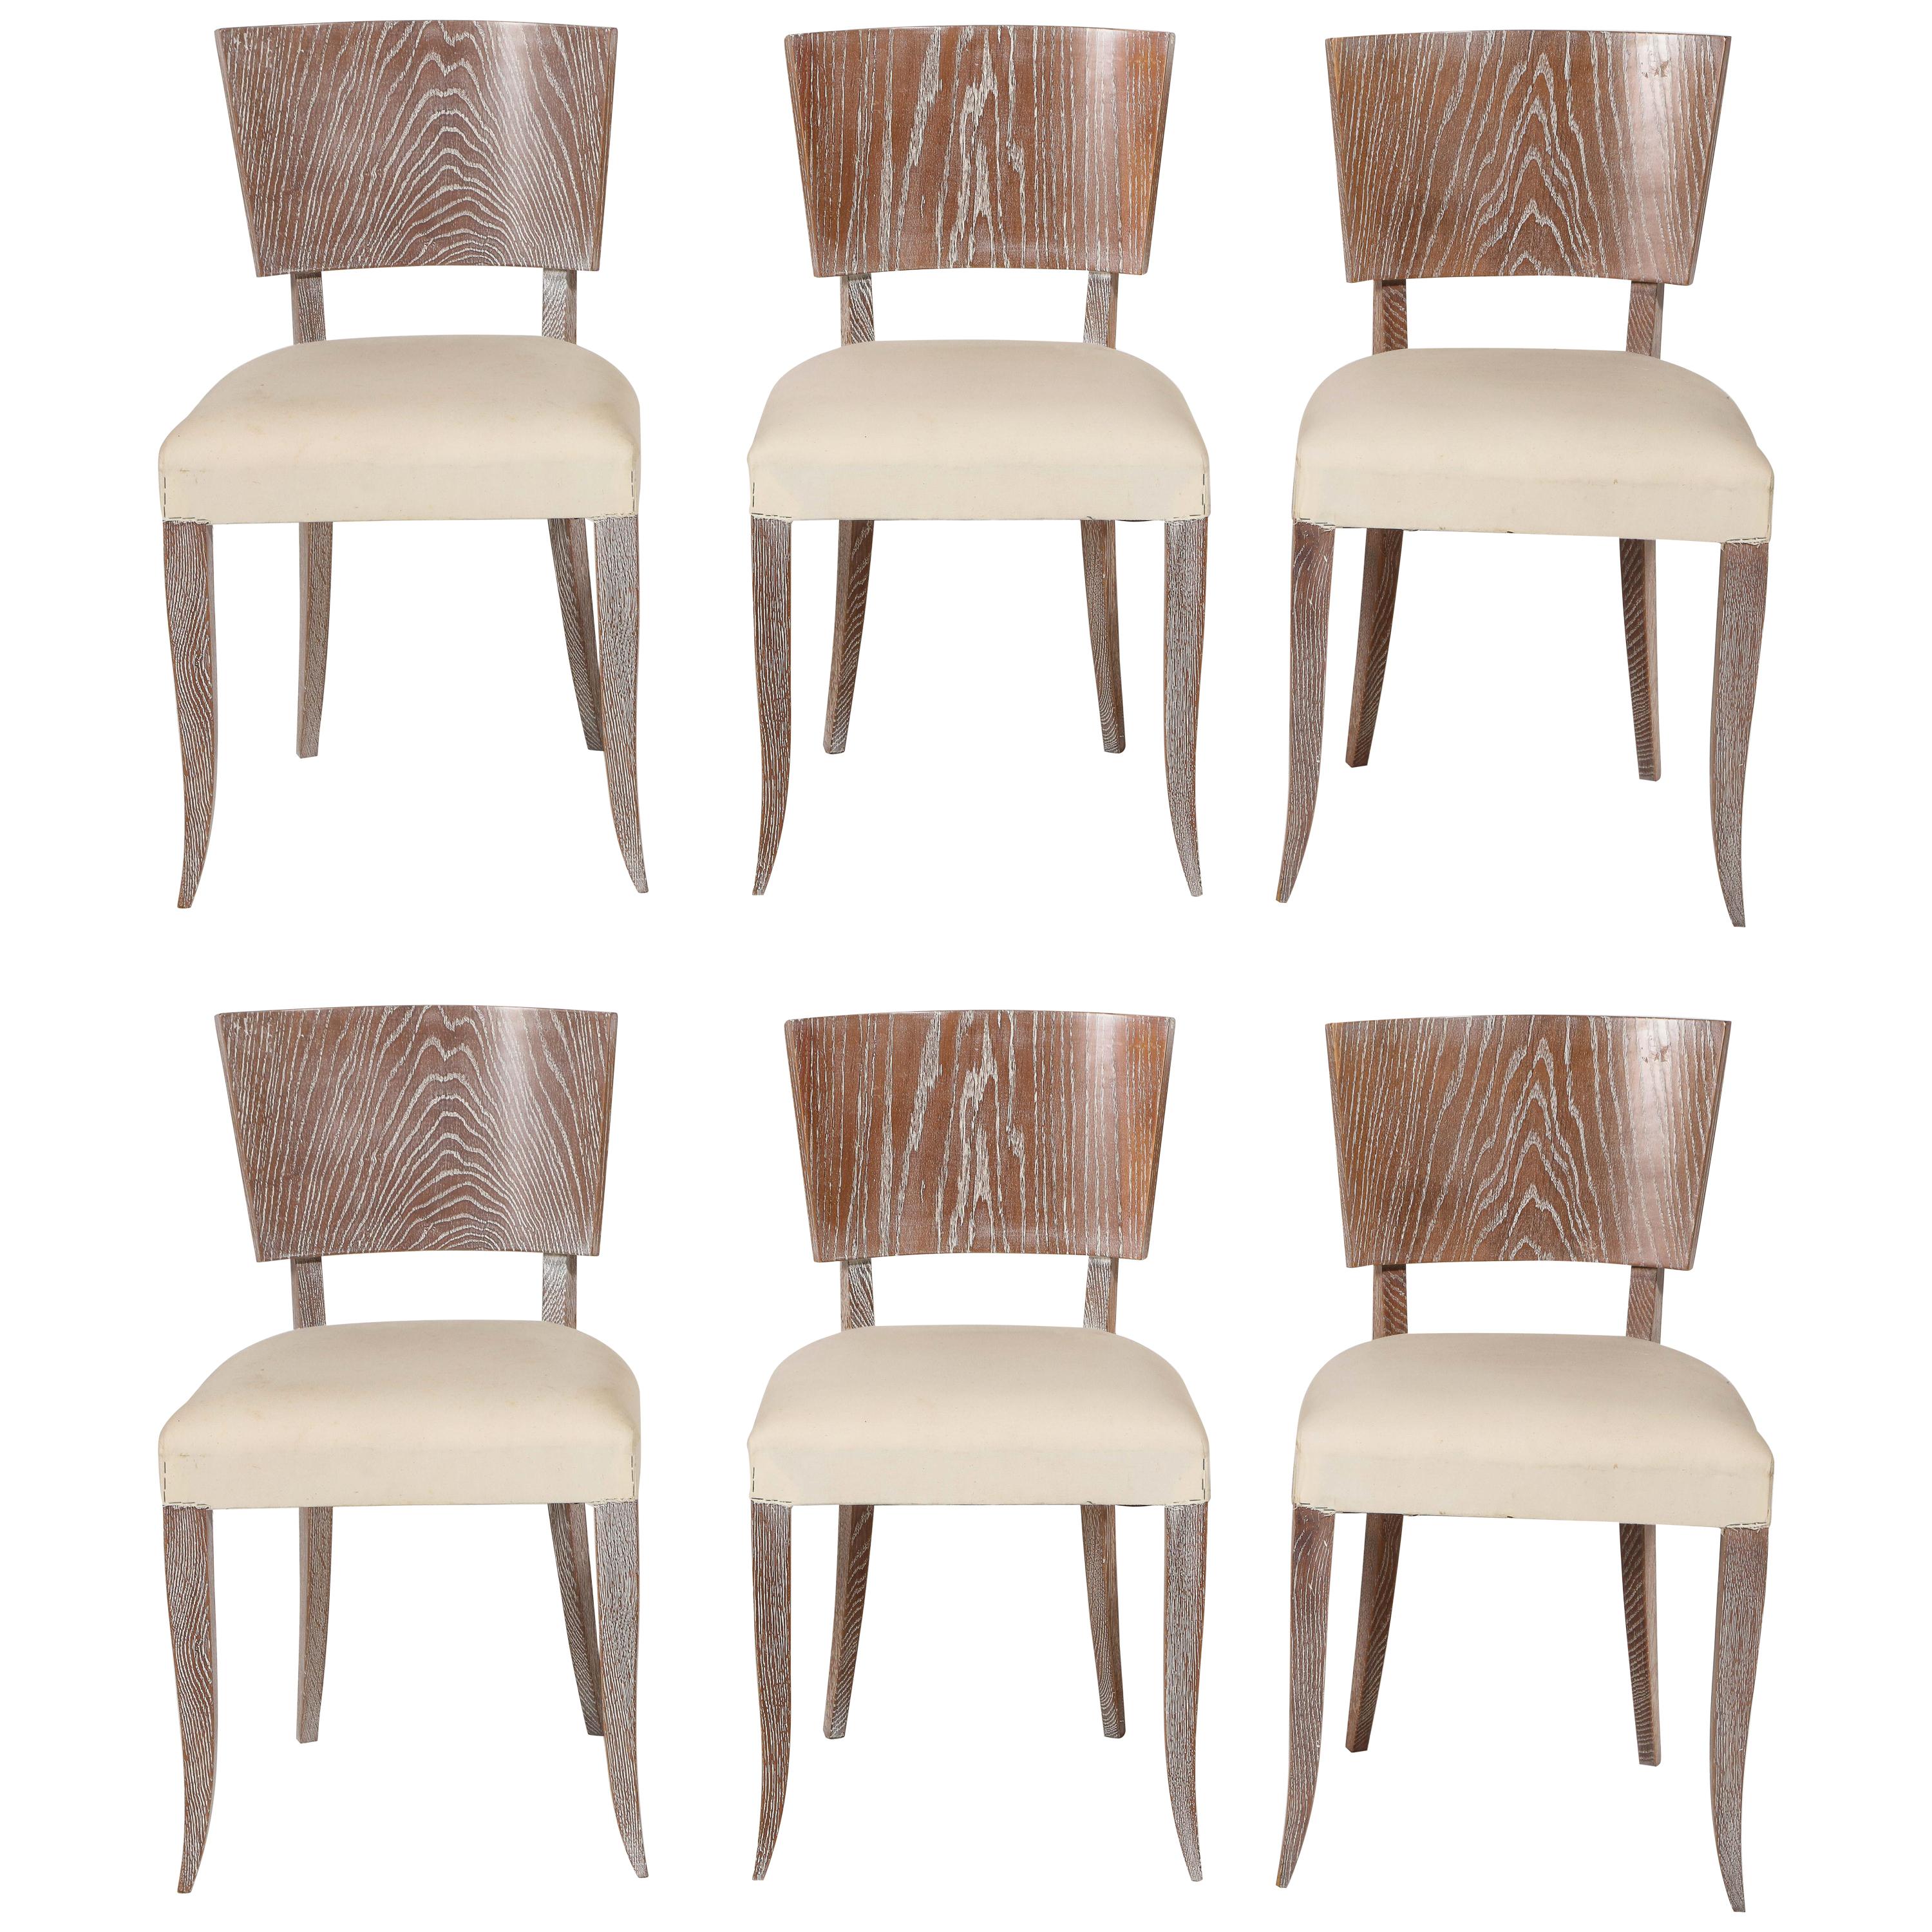 6 French Midcentury Cerused Oak White Dining Chairs, 1950s